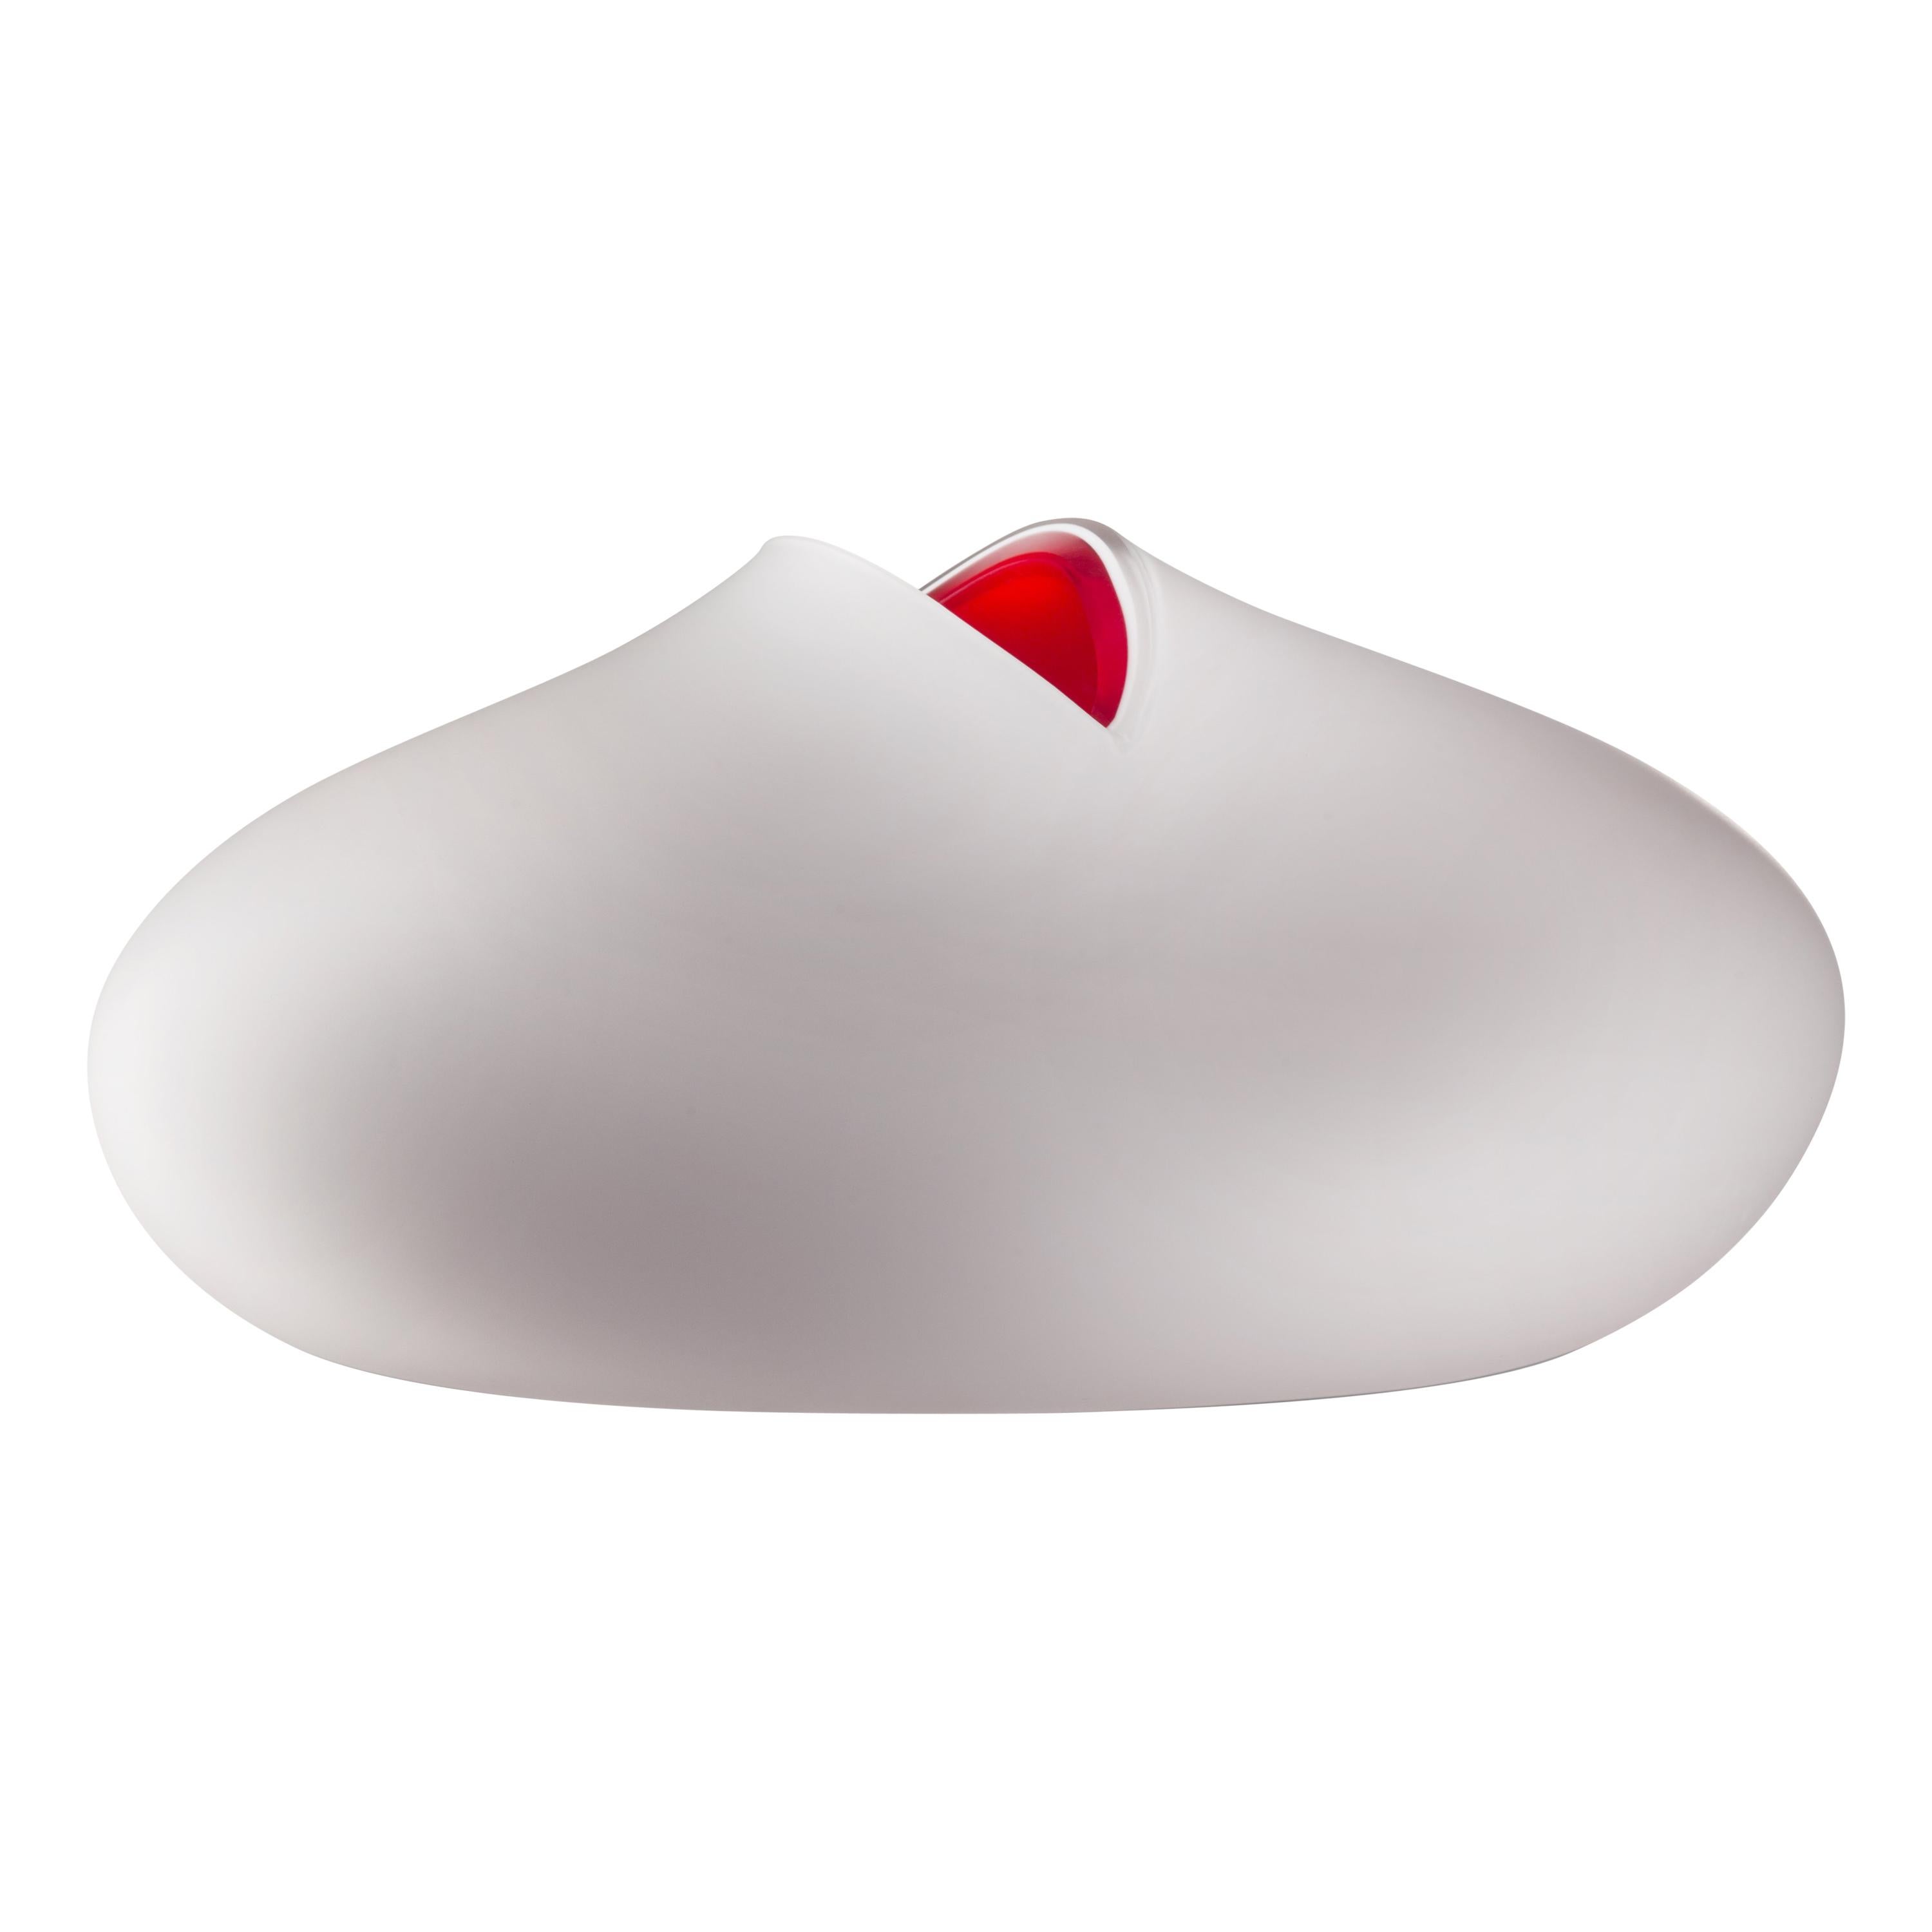 Salviati Extra Large Saxi Vase in White and Red by Norberto Moretti For Sale